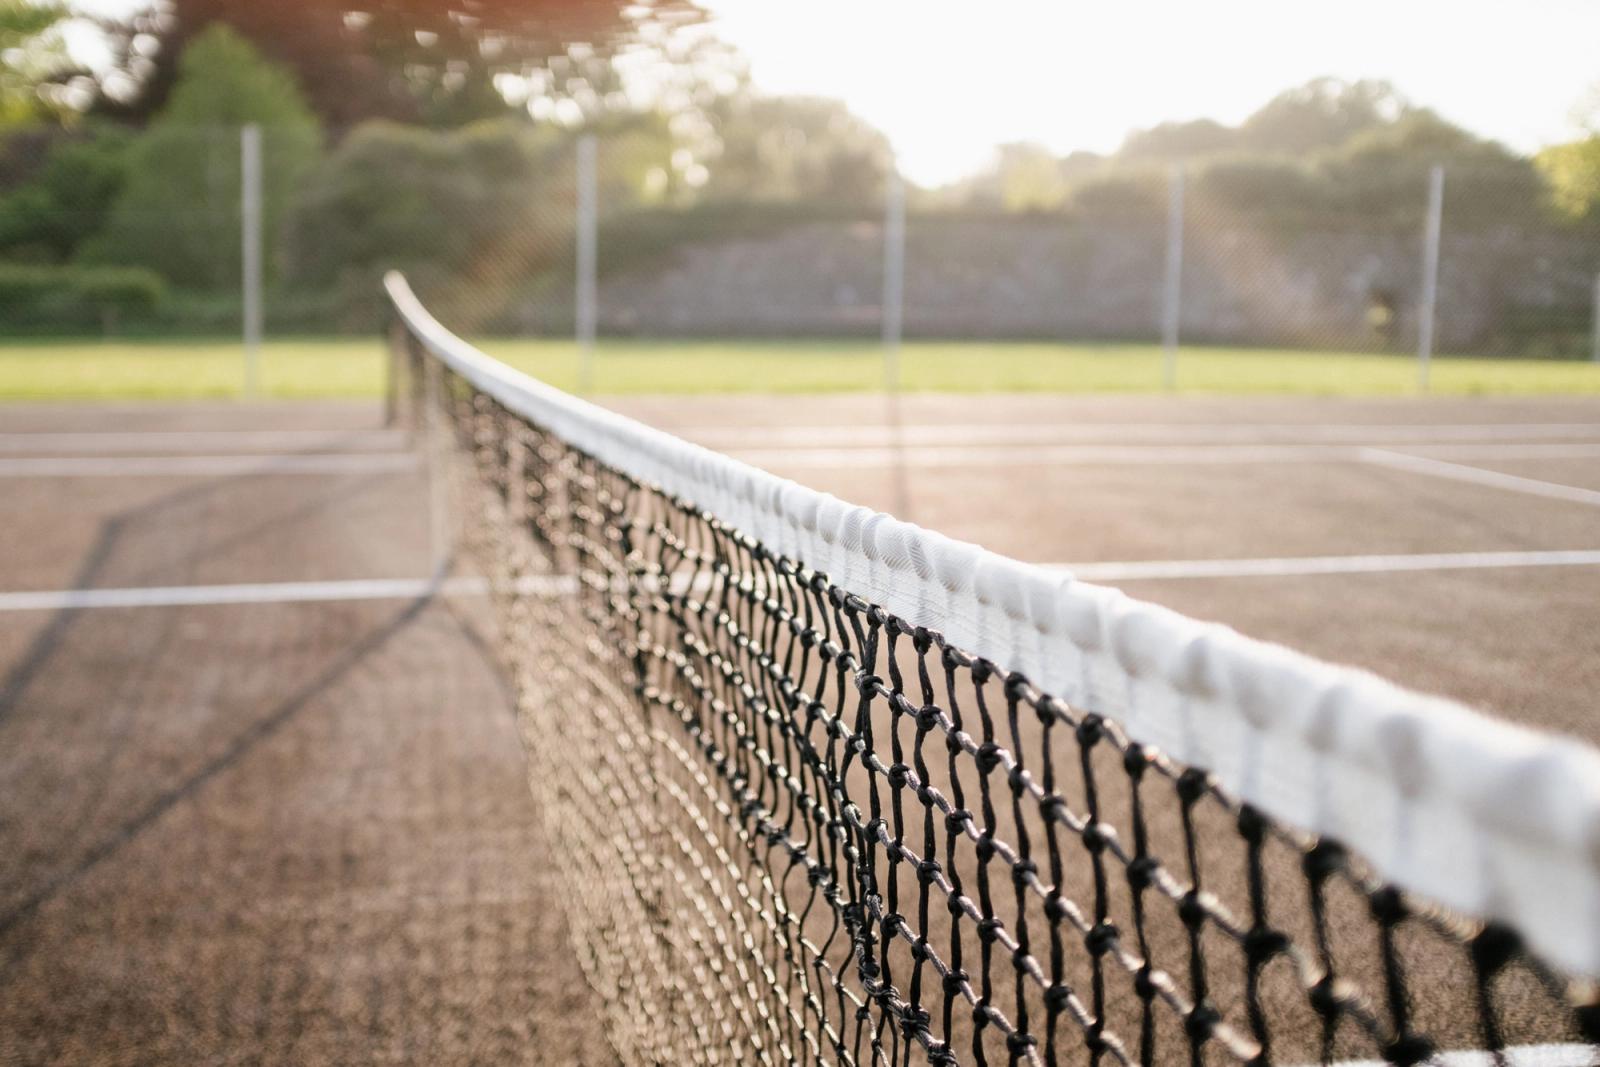 Hotels with tennis courts in Ireland